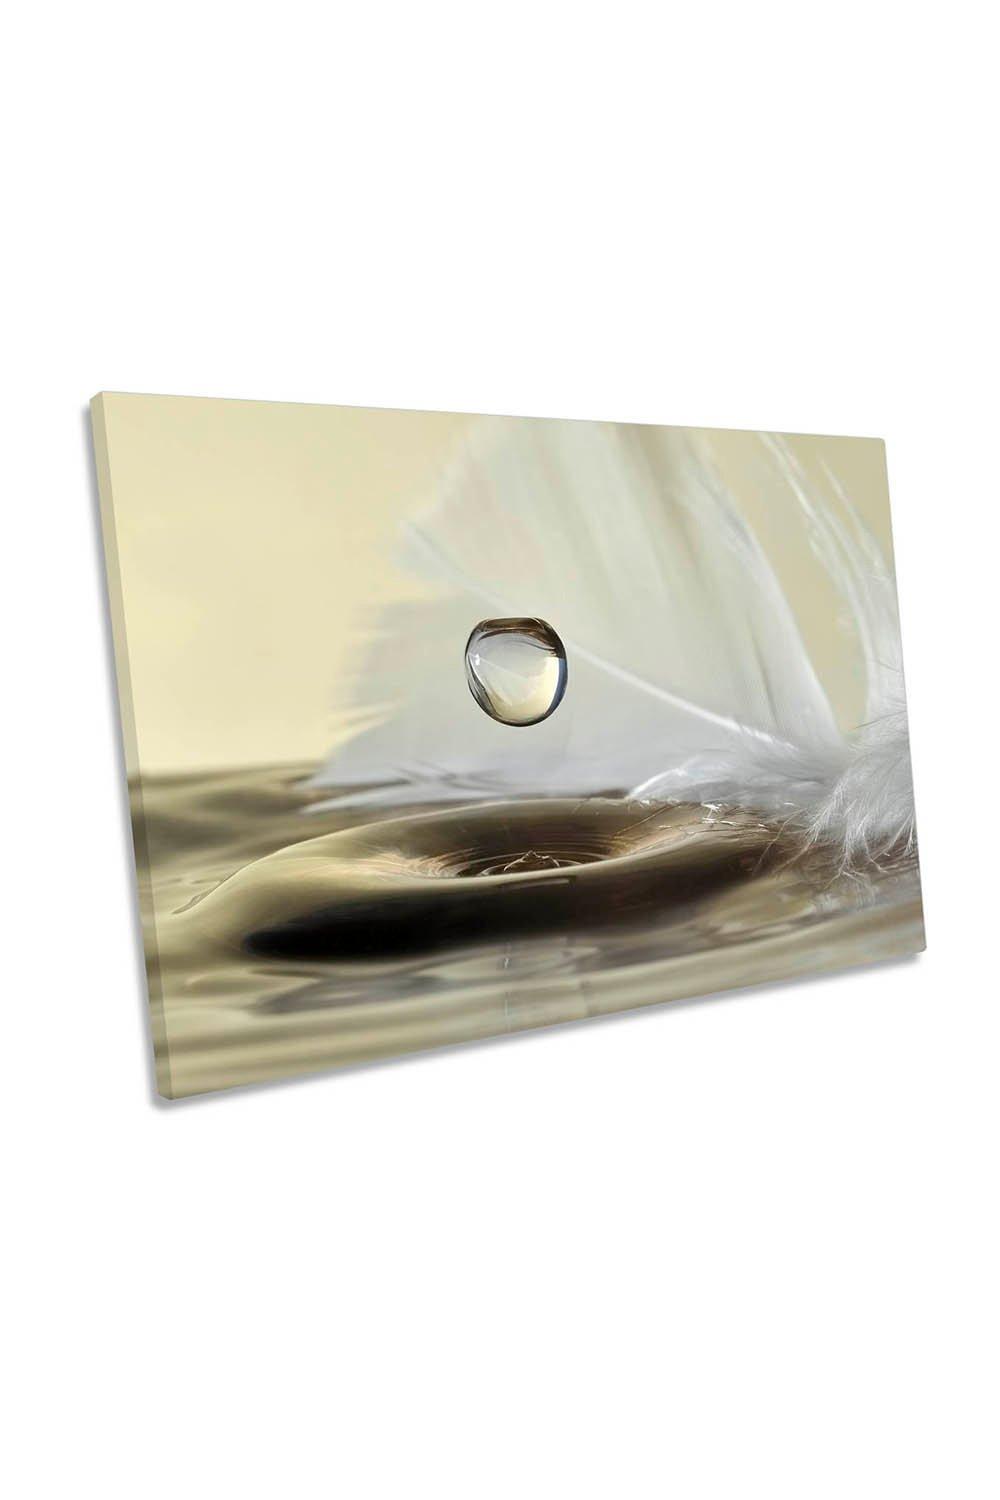 Feather Water Drop Bathroom Beige Canvas Wall Art Picture Print